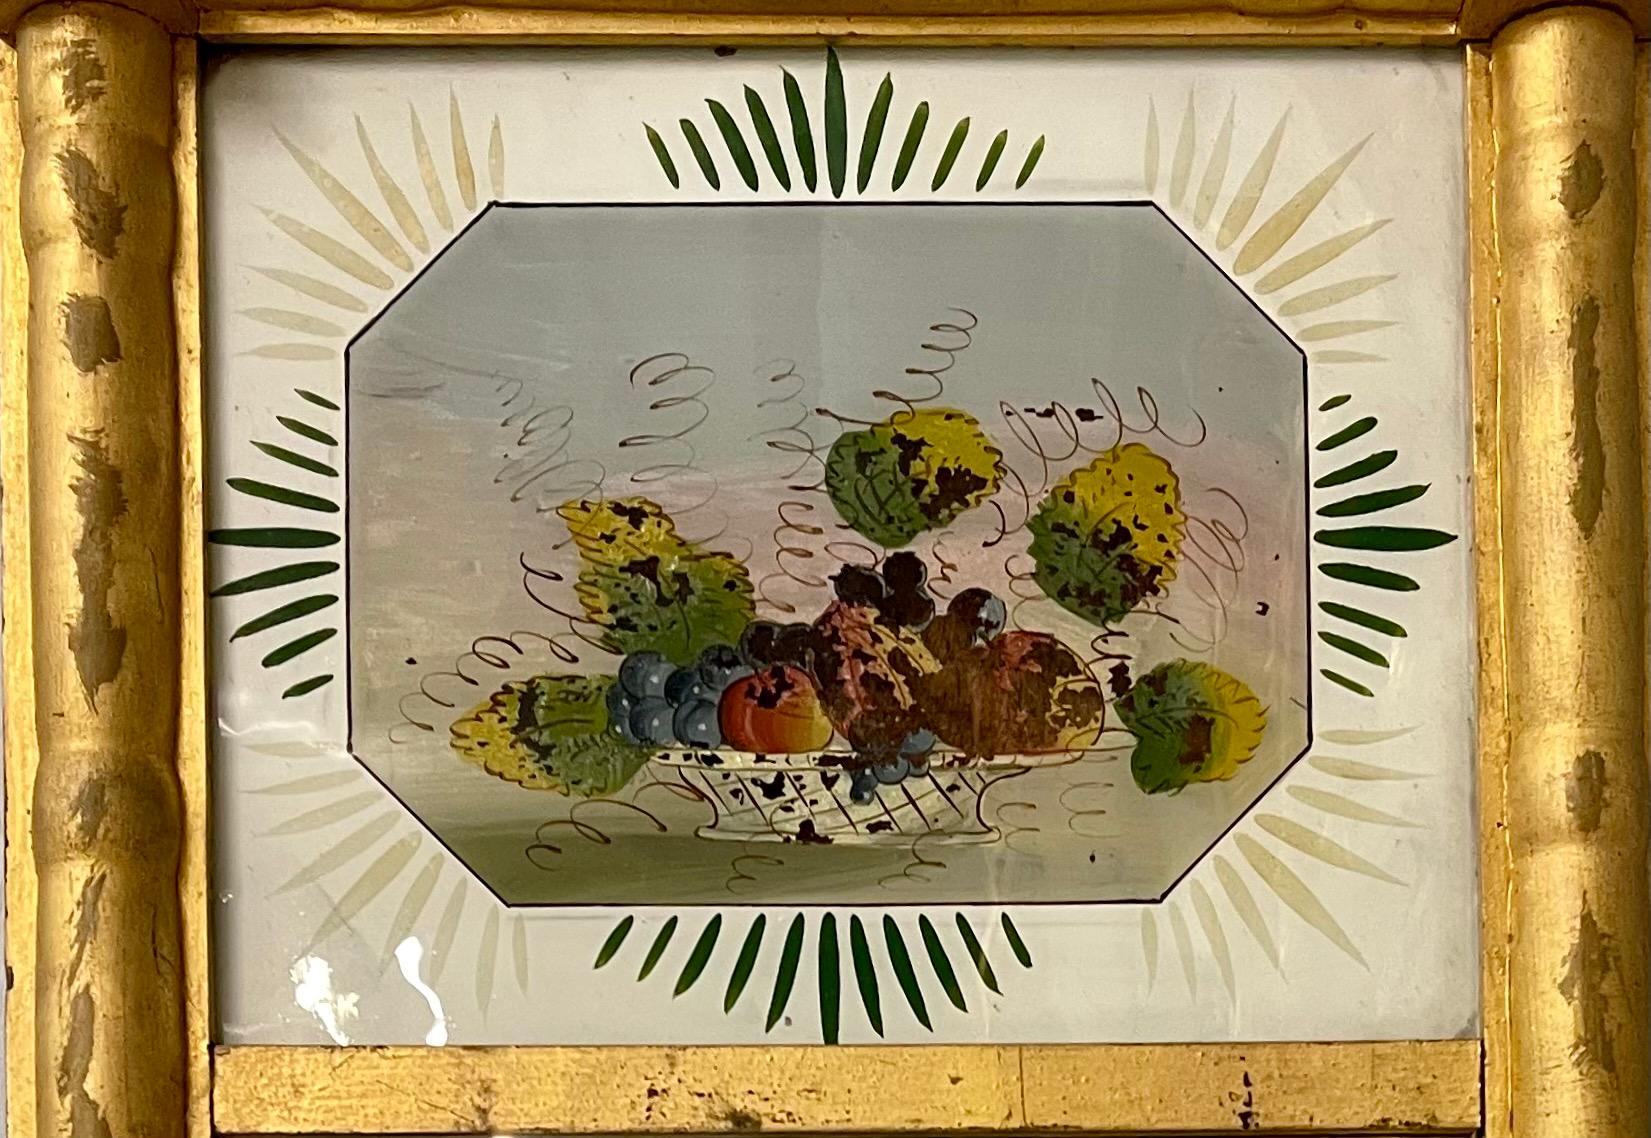 19th century federal eglomise decorated wall or table mirror having a wonderfully gilt decorated frame under an eglomise glass panel depicting a basket of fruit. Can easily be used on top of any table or vanity if placed on a stand.